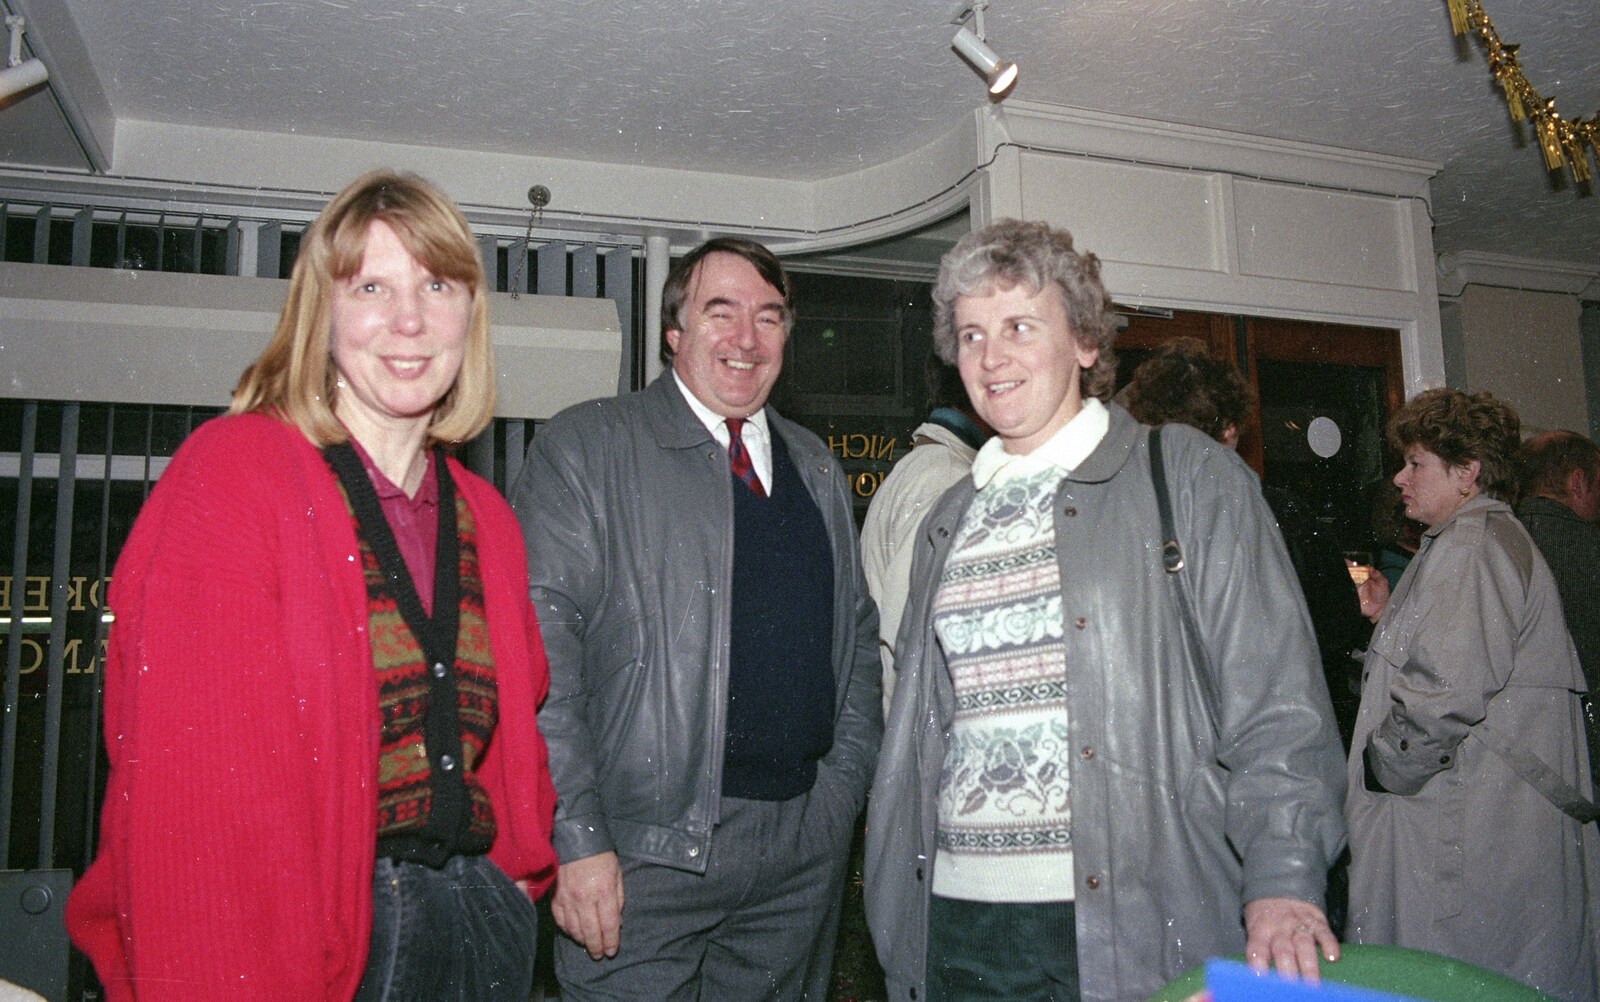 Janet, David and Linda in Merrick Hill from Carol Singing and Late Night Shopping, Stuston, Diss and Harleston, Norfolk - 16th December 1990